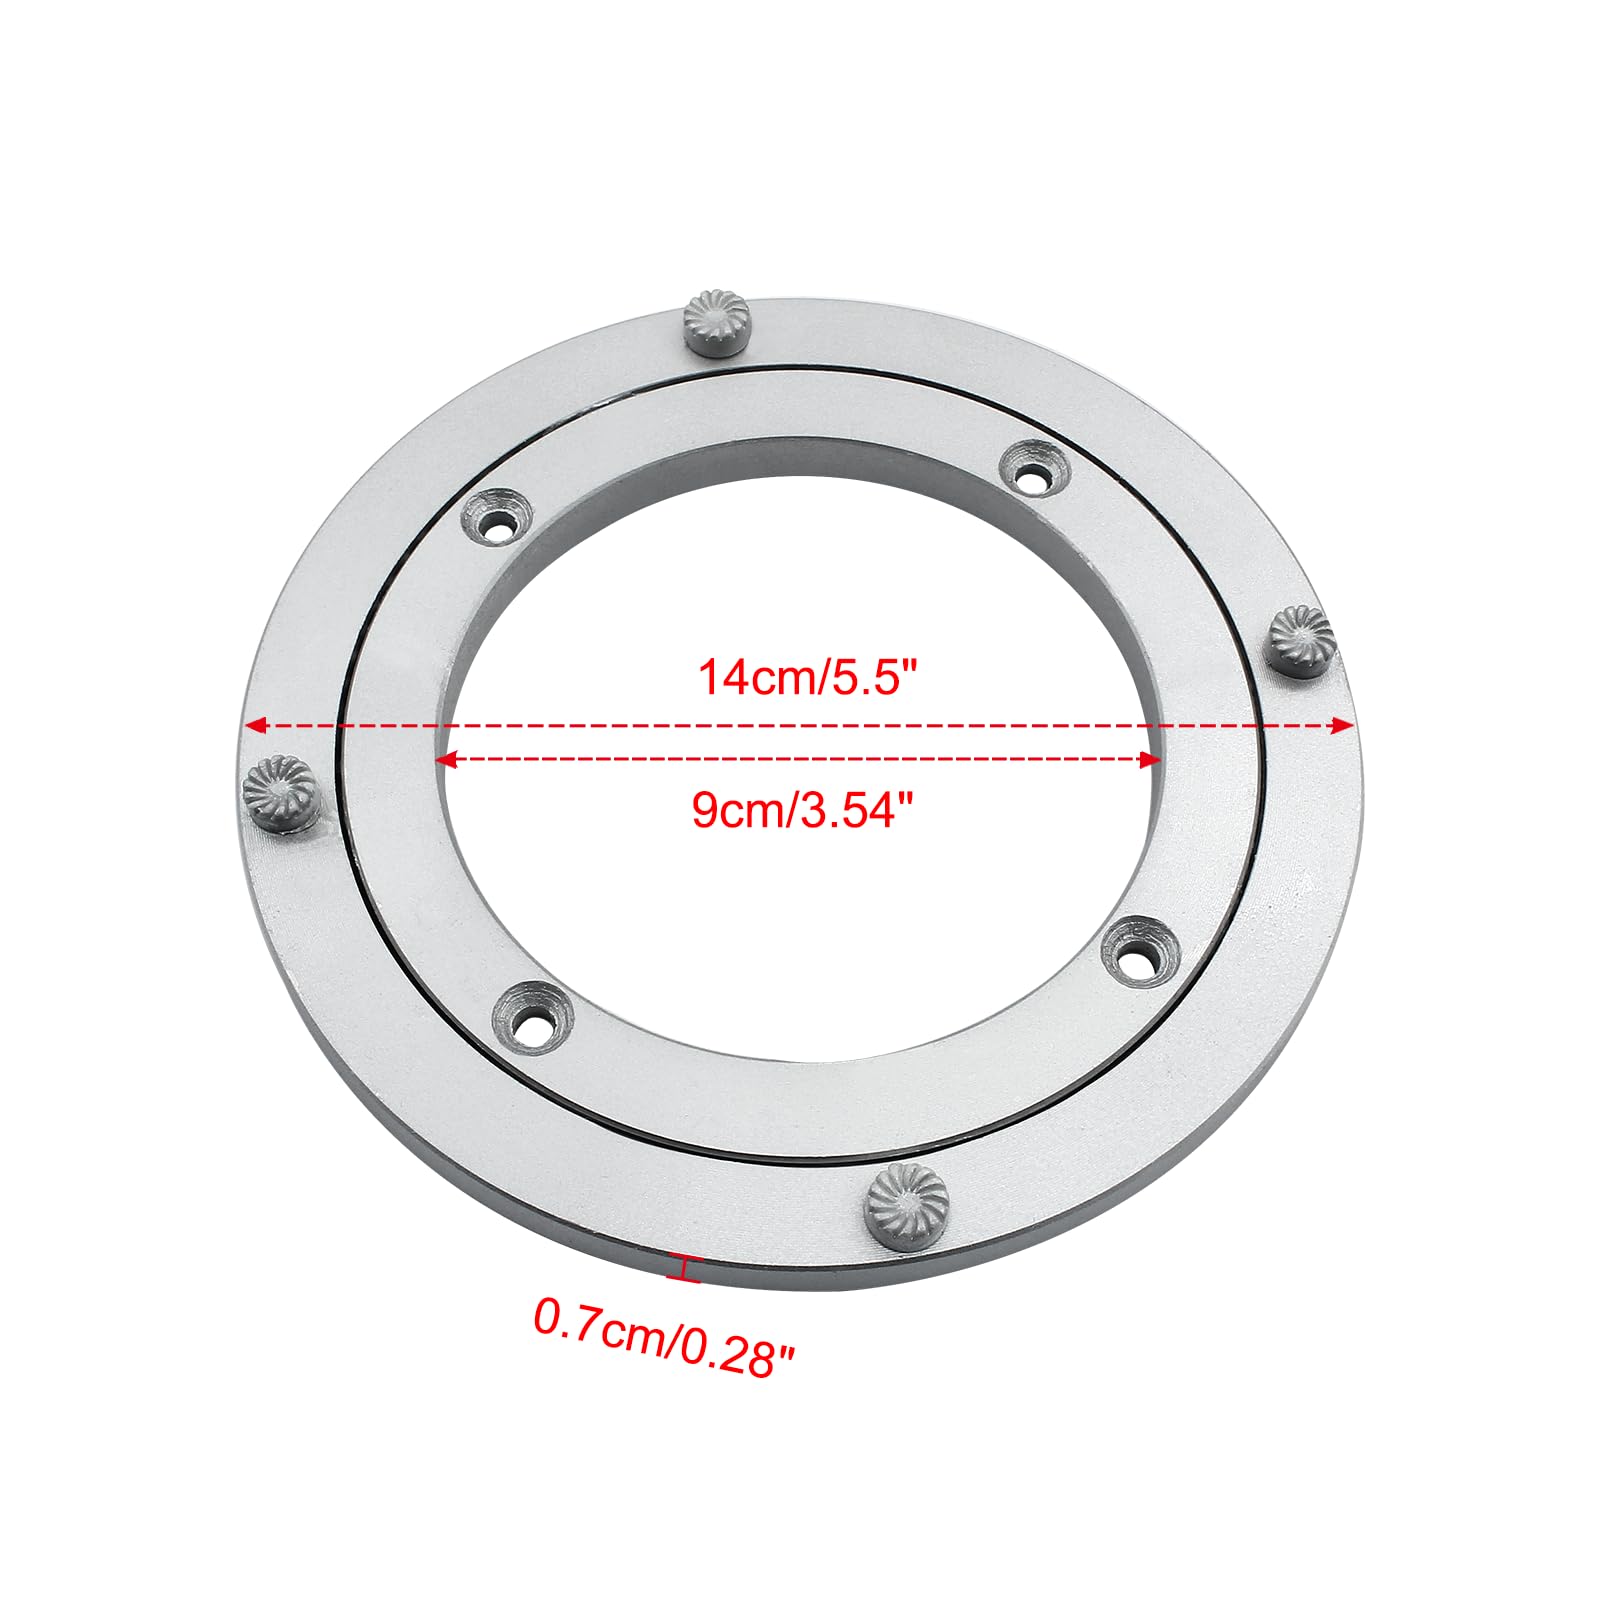 Bivethoi Turntable Ring 8", Lazy Susan Rotating Bearing Heavy Duty Swivel Plate for Round Table